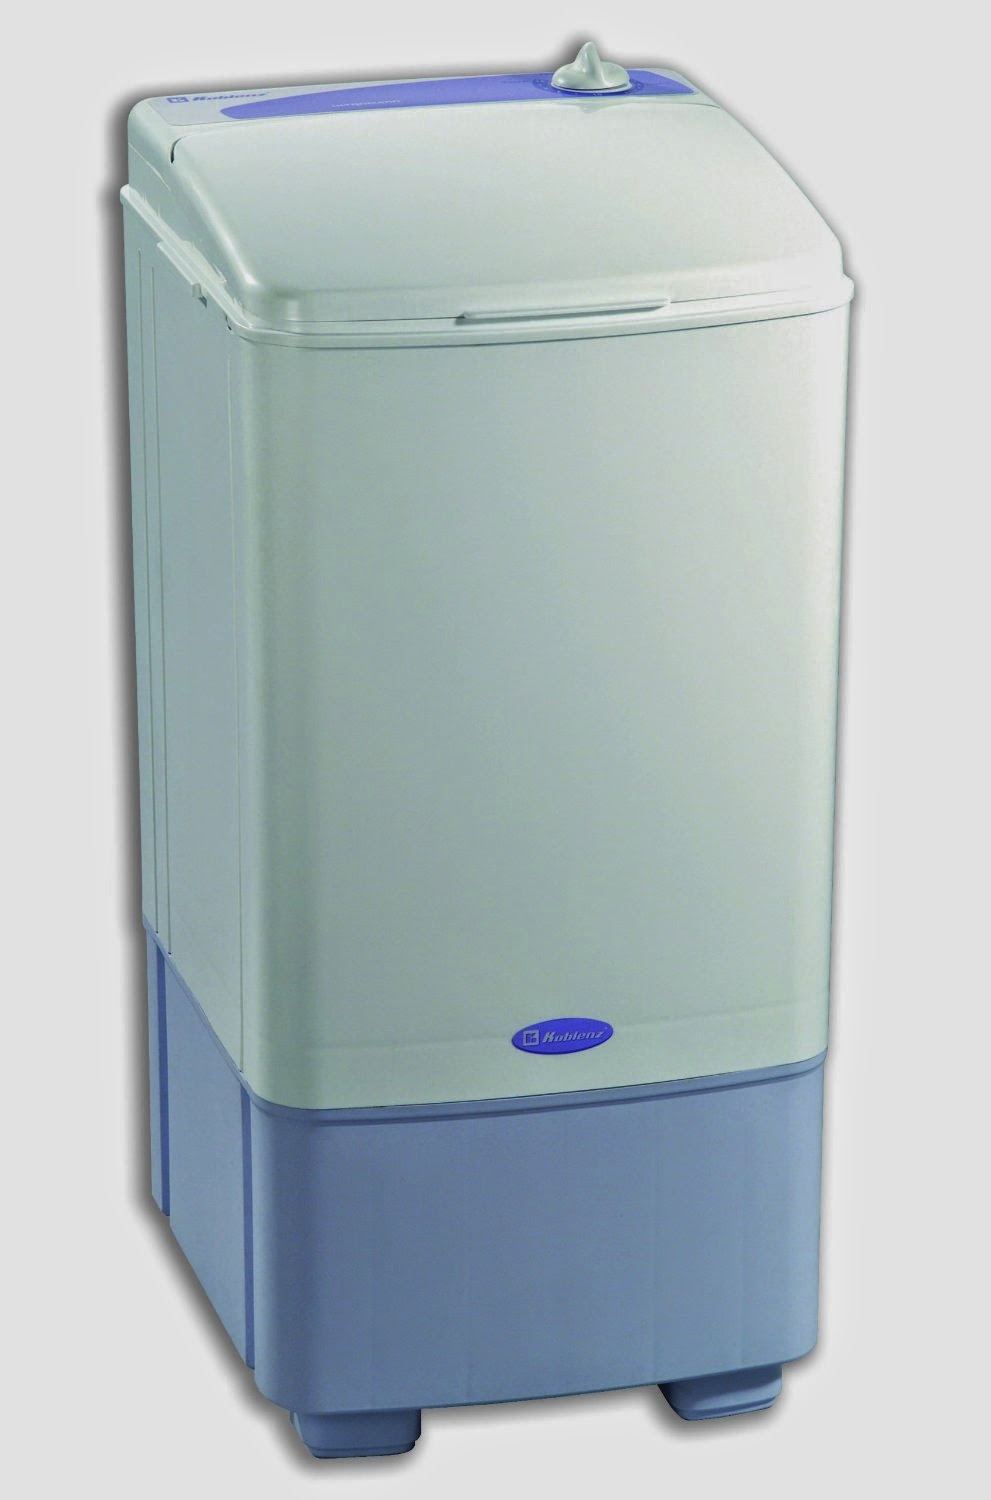 portable washer dryer combo: portable washer and dryer combo for apartments